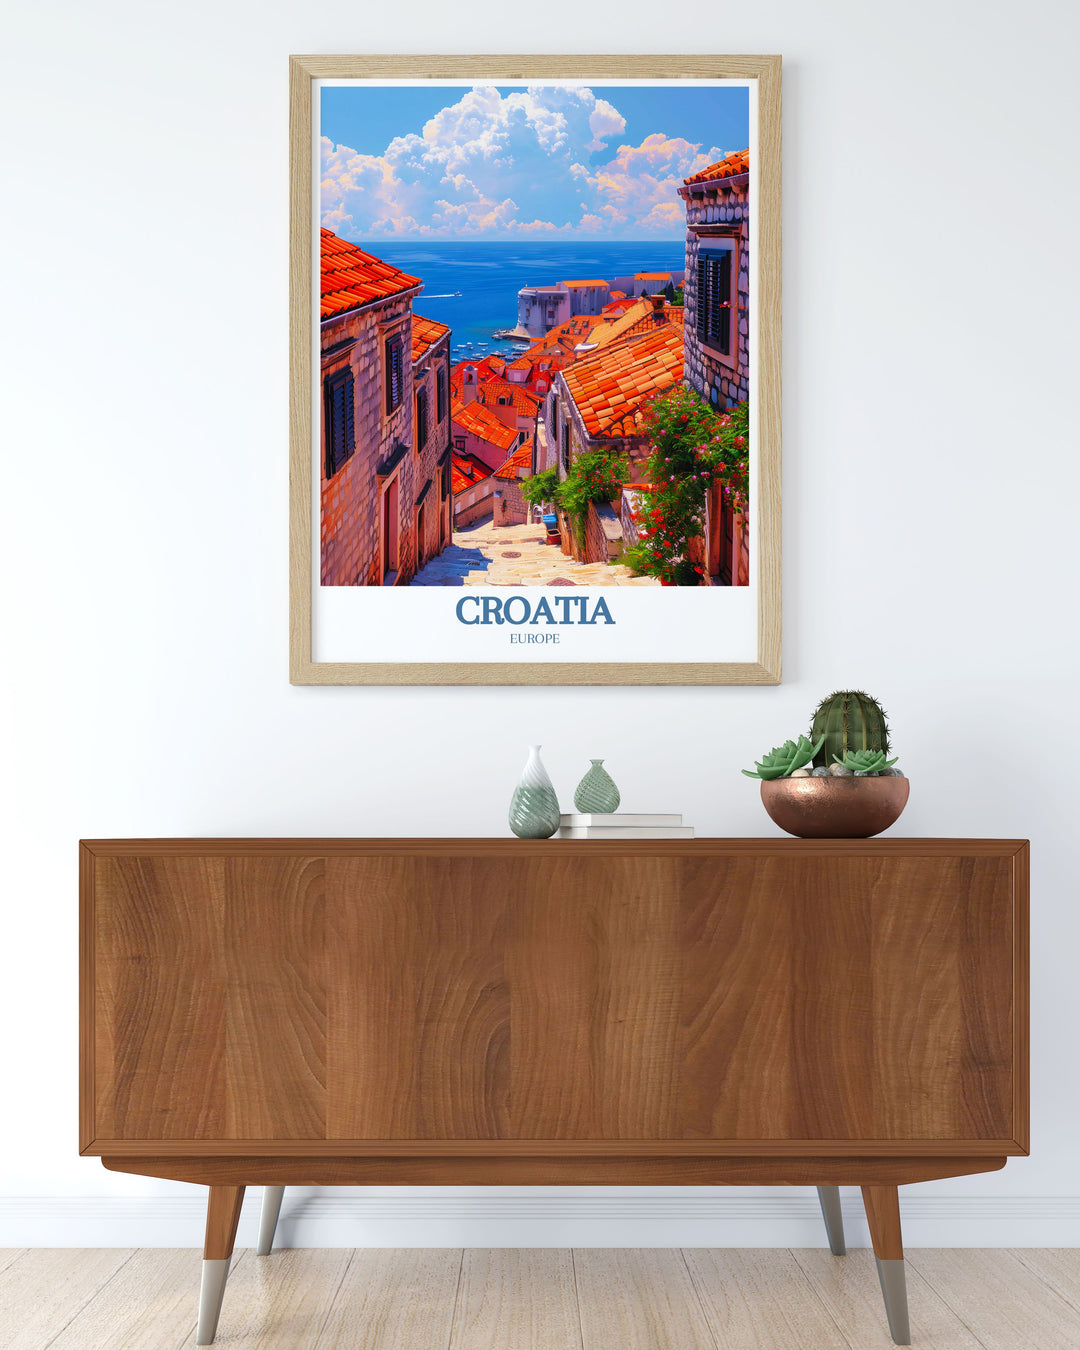 Showcasing the lush landscapes of Split and the coastal charm of the Adriatic Sea, this poster is ideal for art lovers who appreciate the diverse and stunning beauty of Croatia.